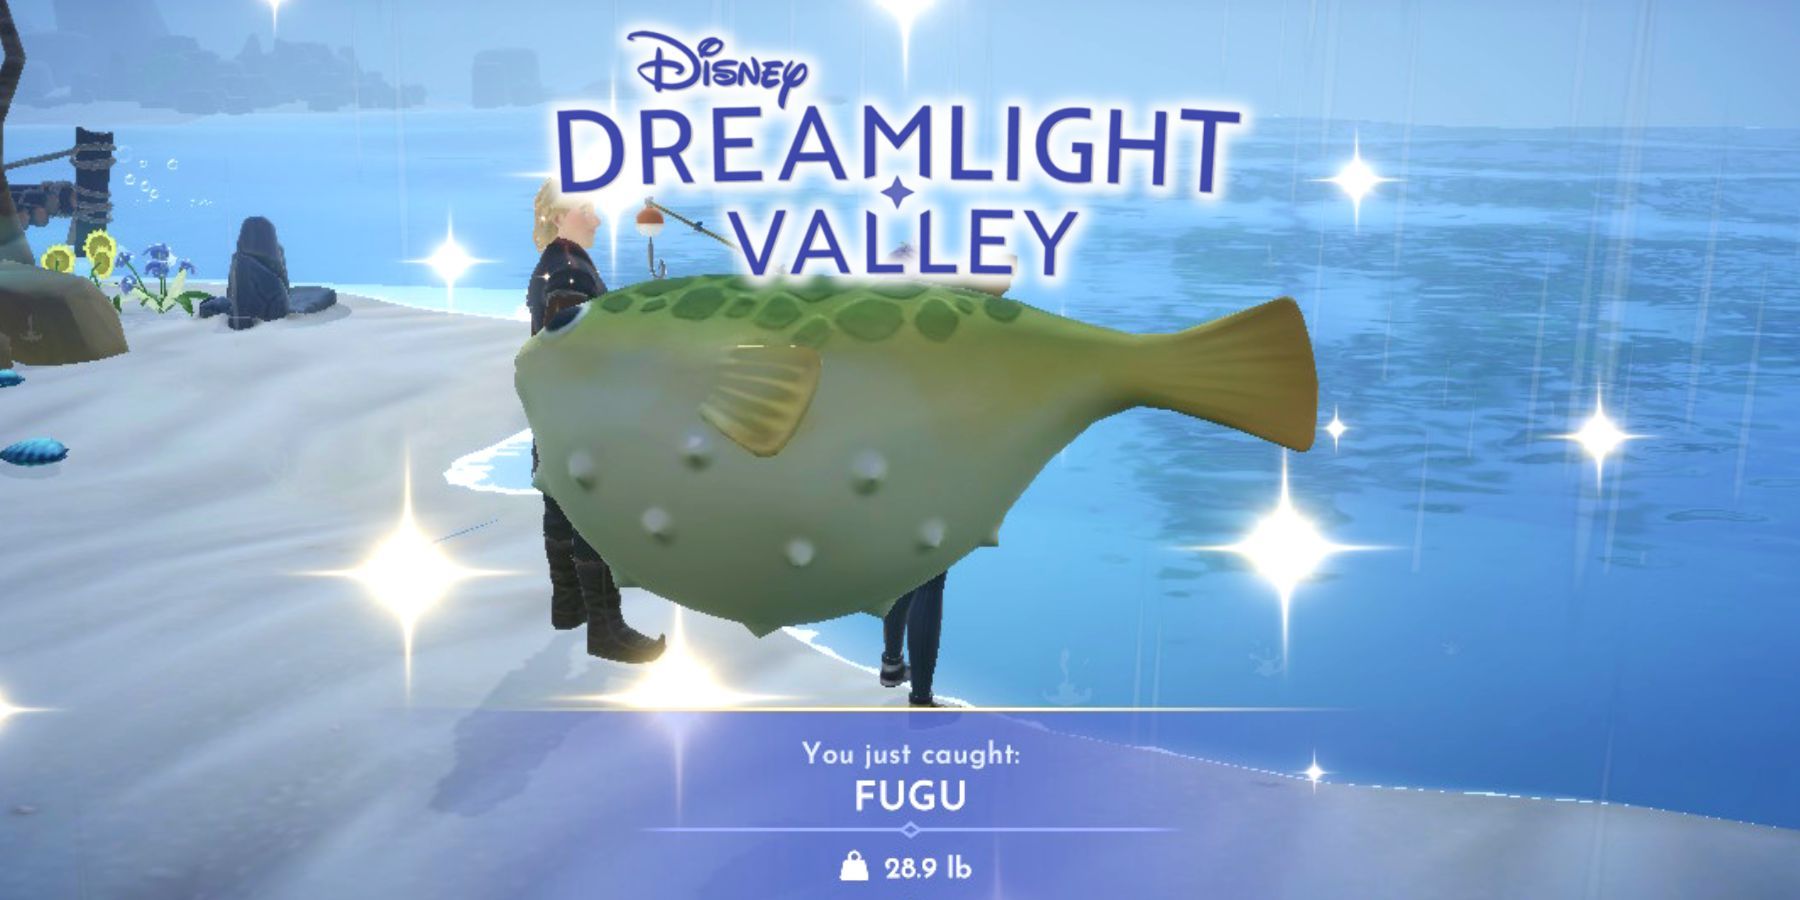 Catching Big Fish with a Disney Princess KIDS ROD - First guy on